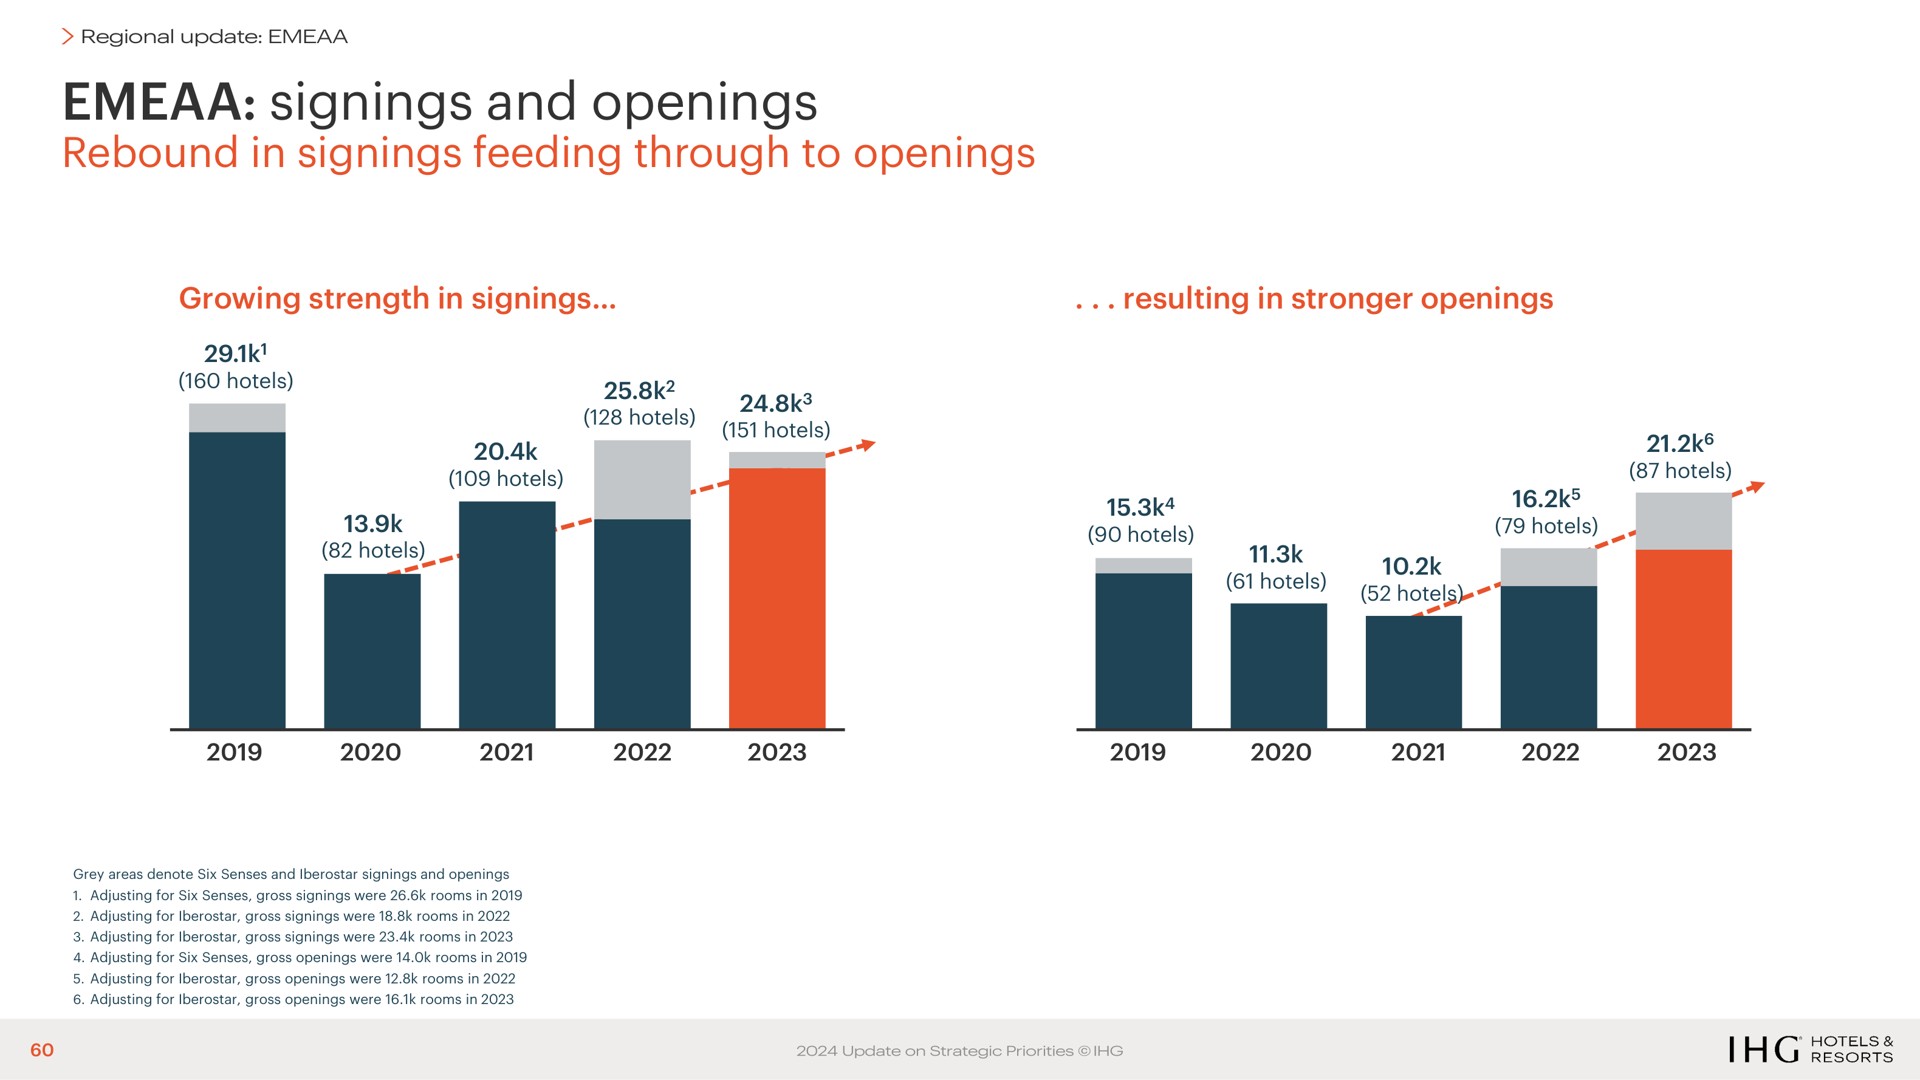 signings and openings rebound in signings feeding through to openings | IHG Hotels